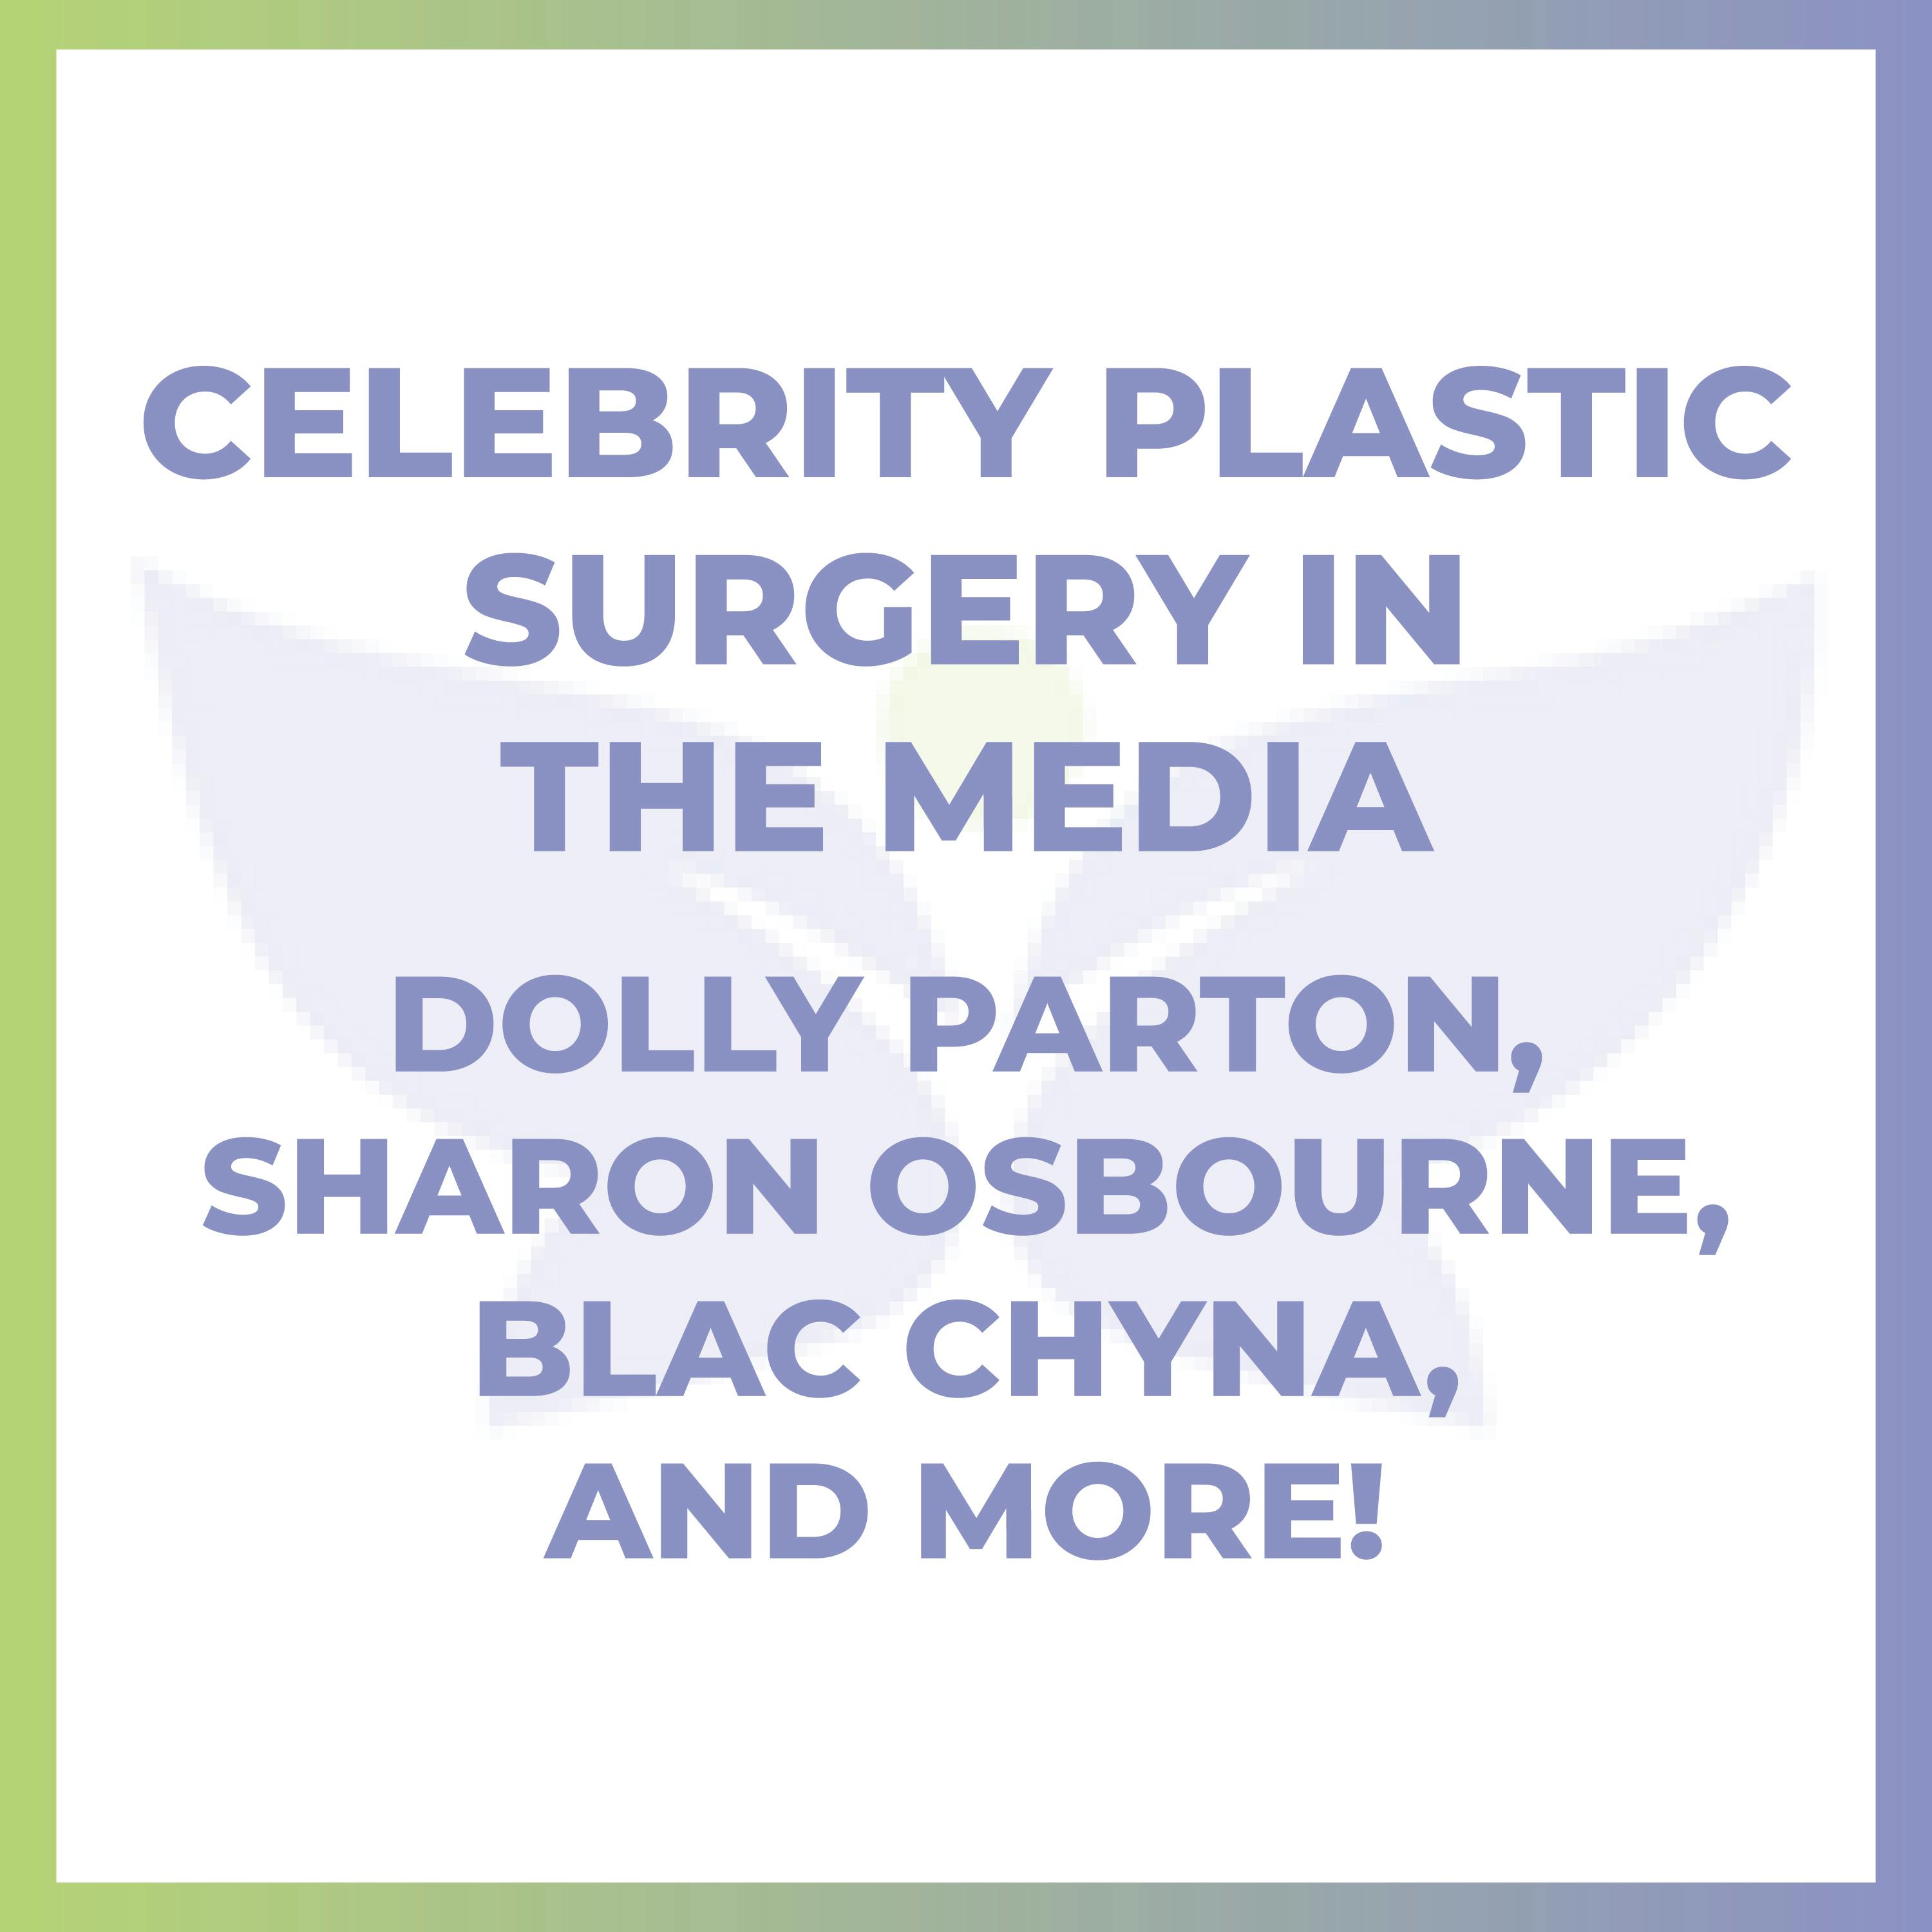 Celebrity Plastic Surgery in the Media – Dolly Parton, Sharon Osbourne, Blac Chyna, and More!